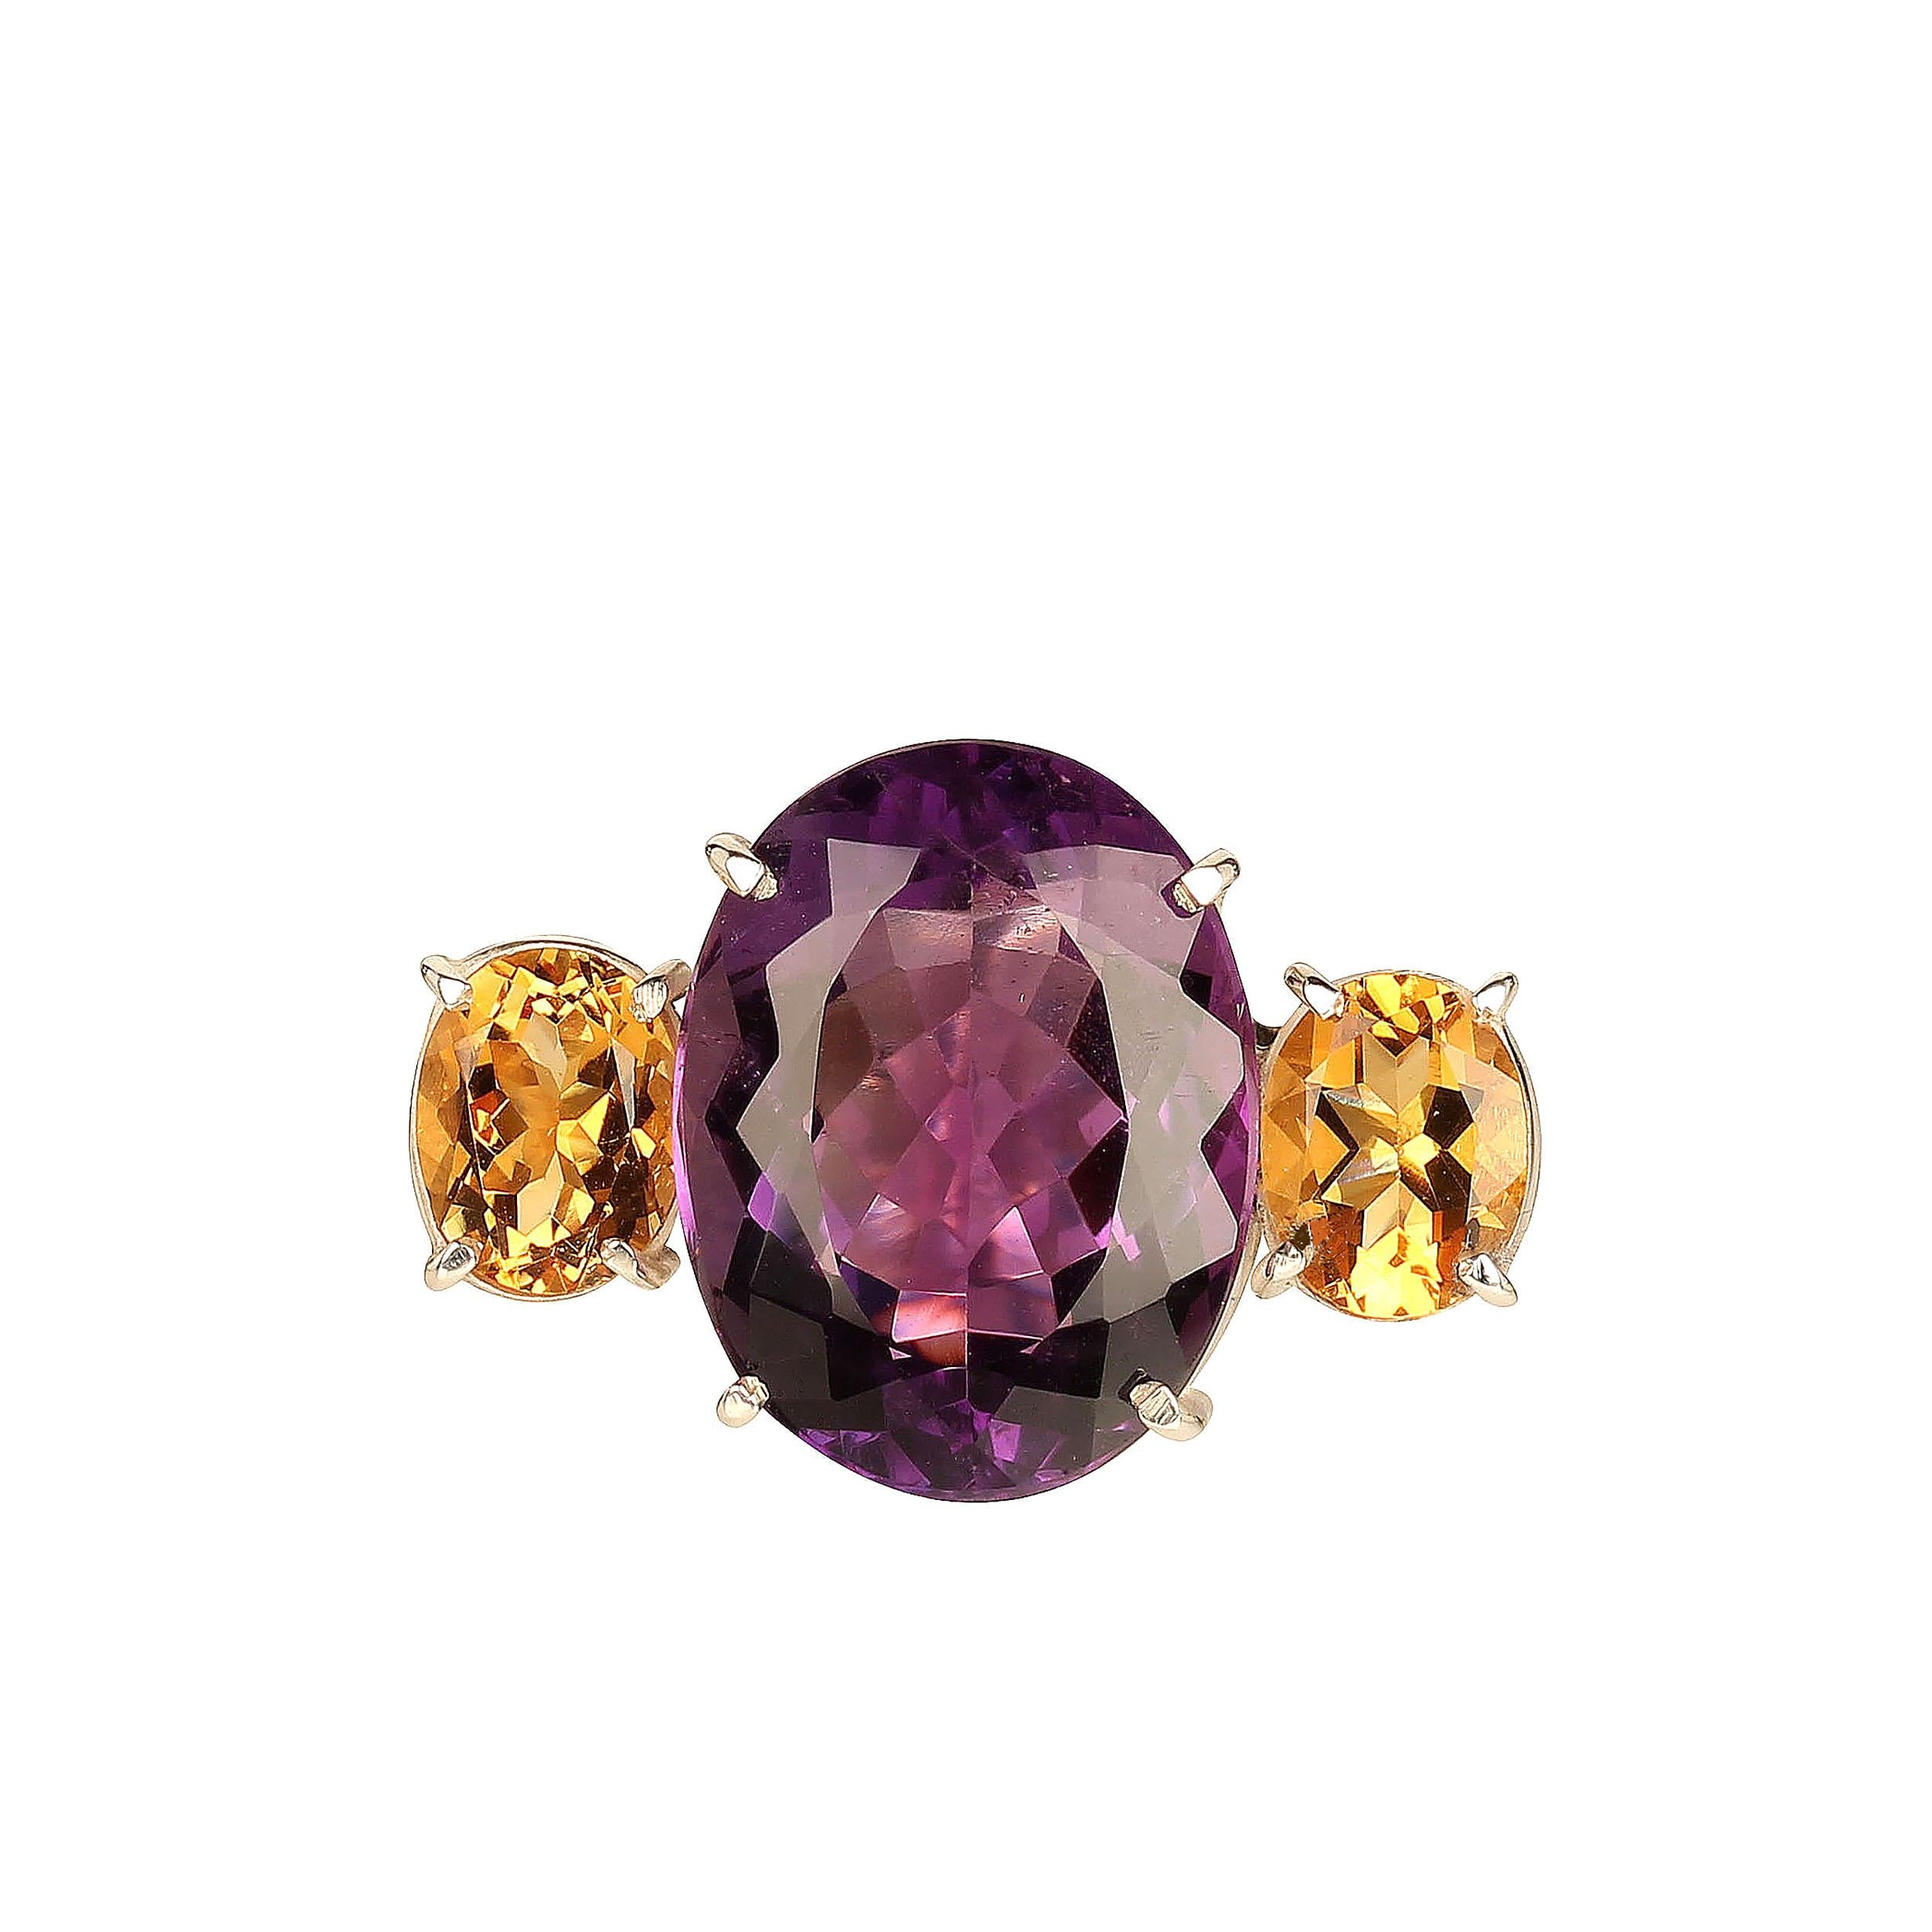 AJD Oval Amethyst Accented with Sparkling Citrines Ring      February Birthstone 2